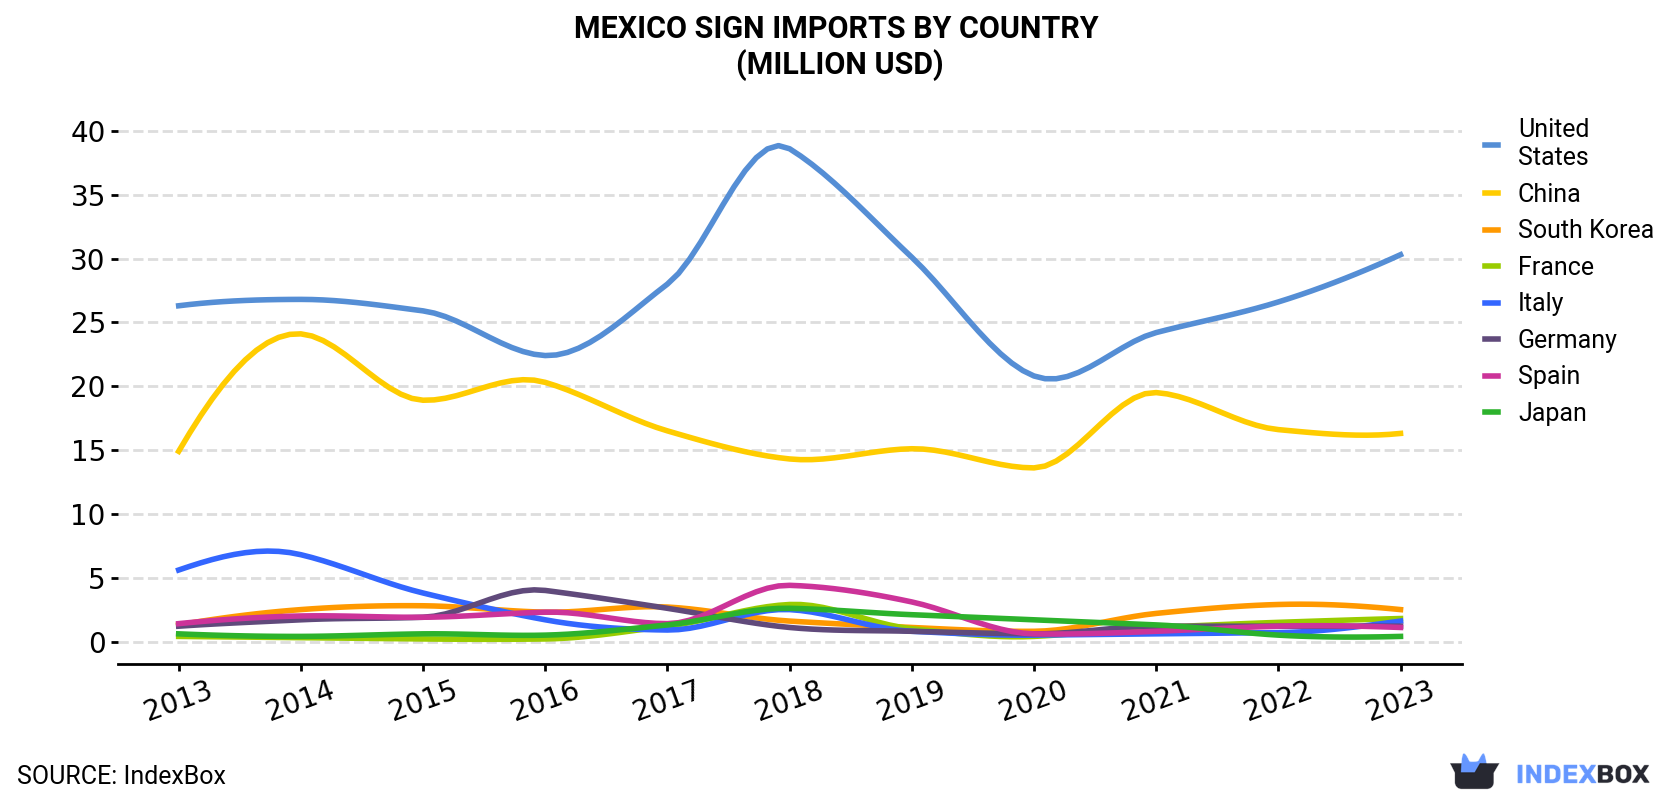 Mexico Sign Imports By Country (Million USD)